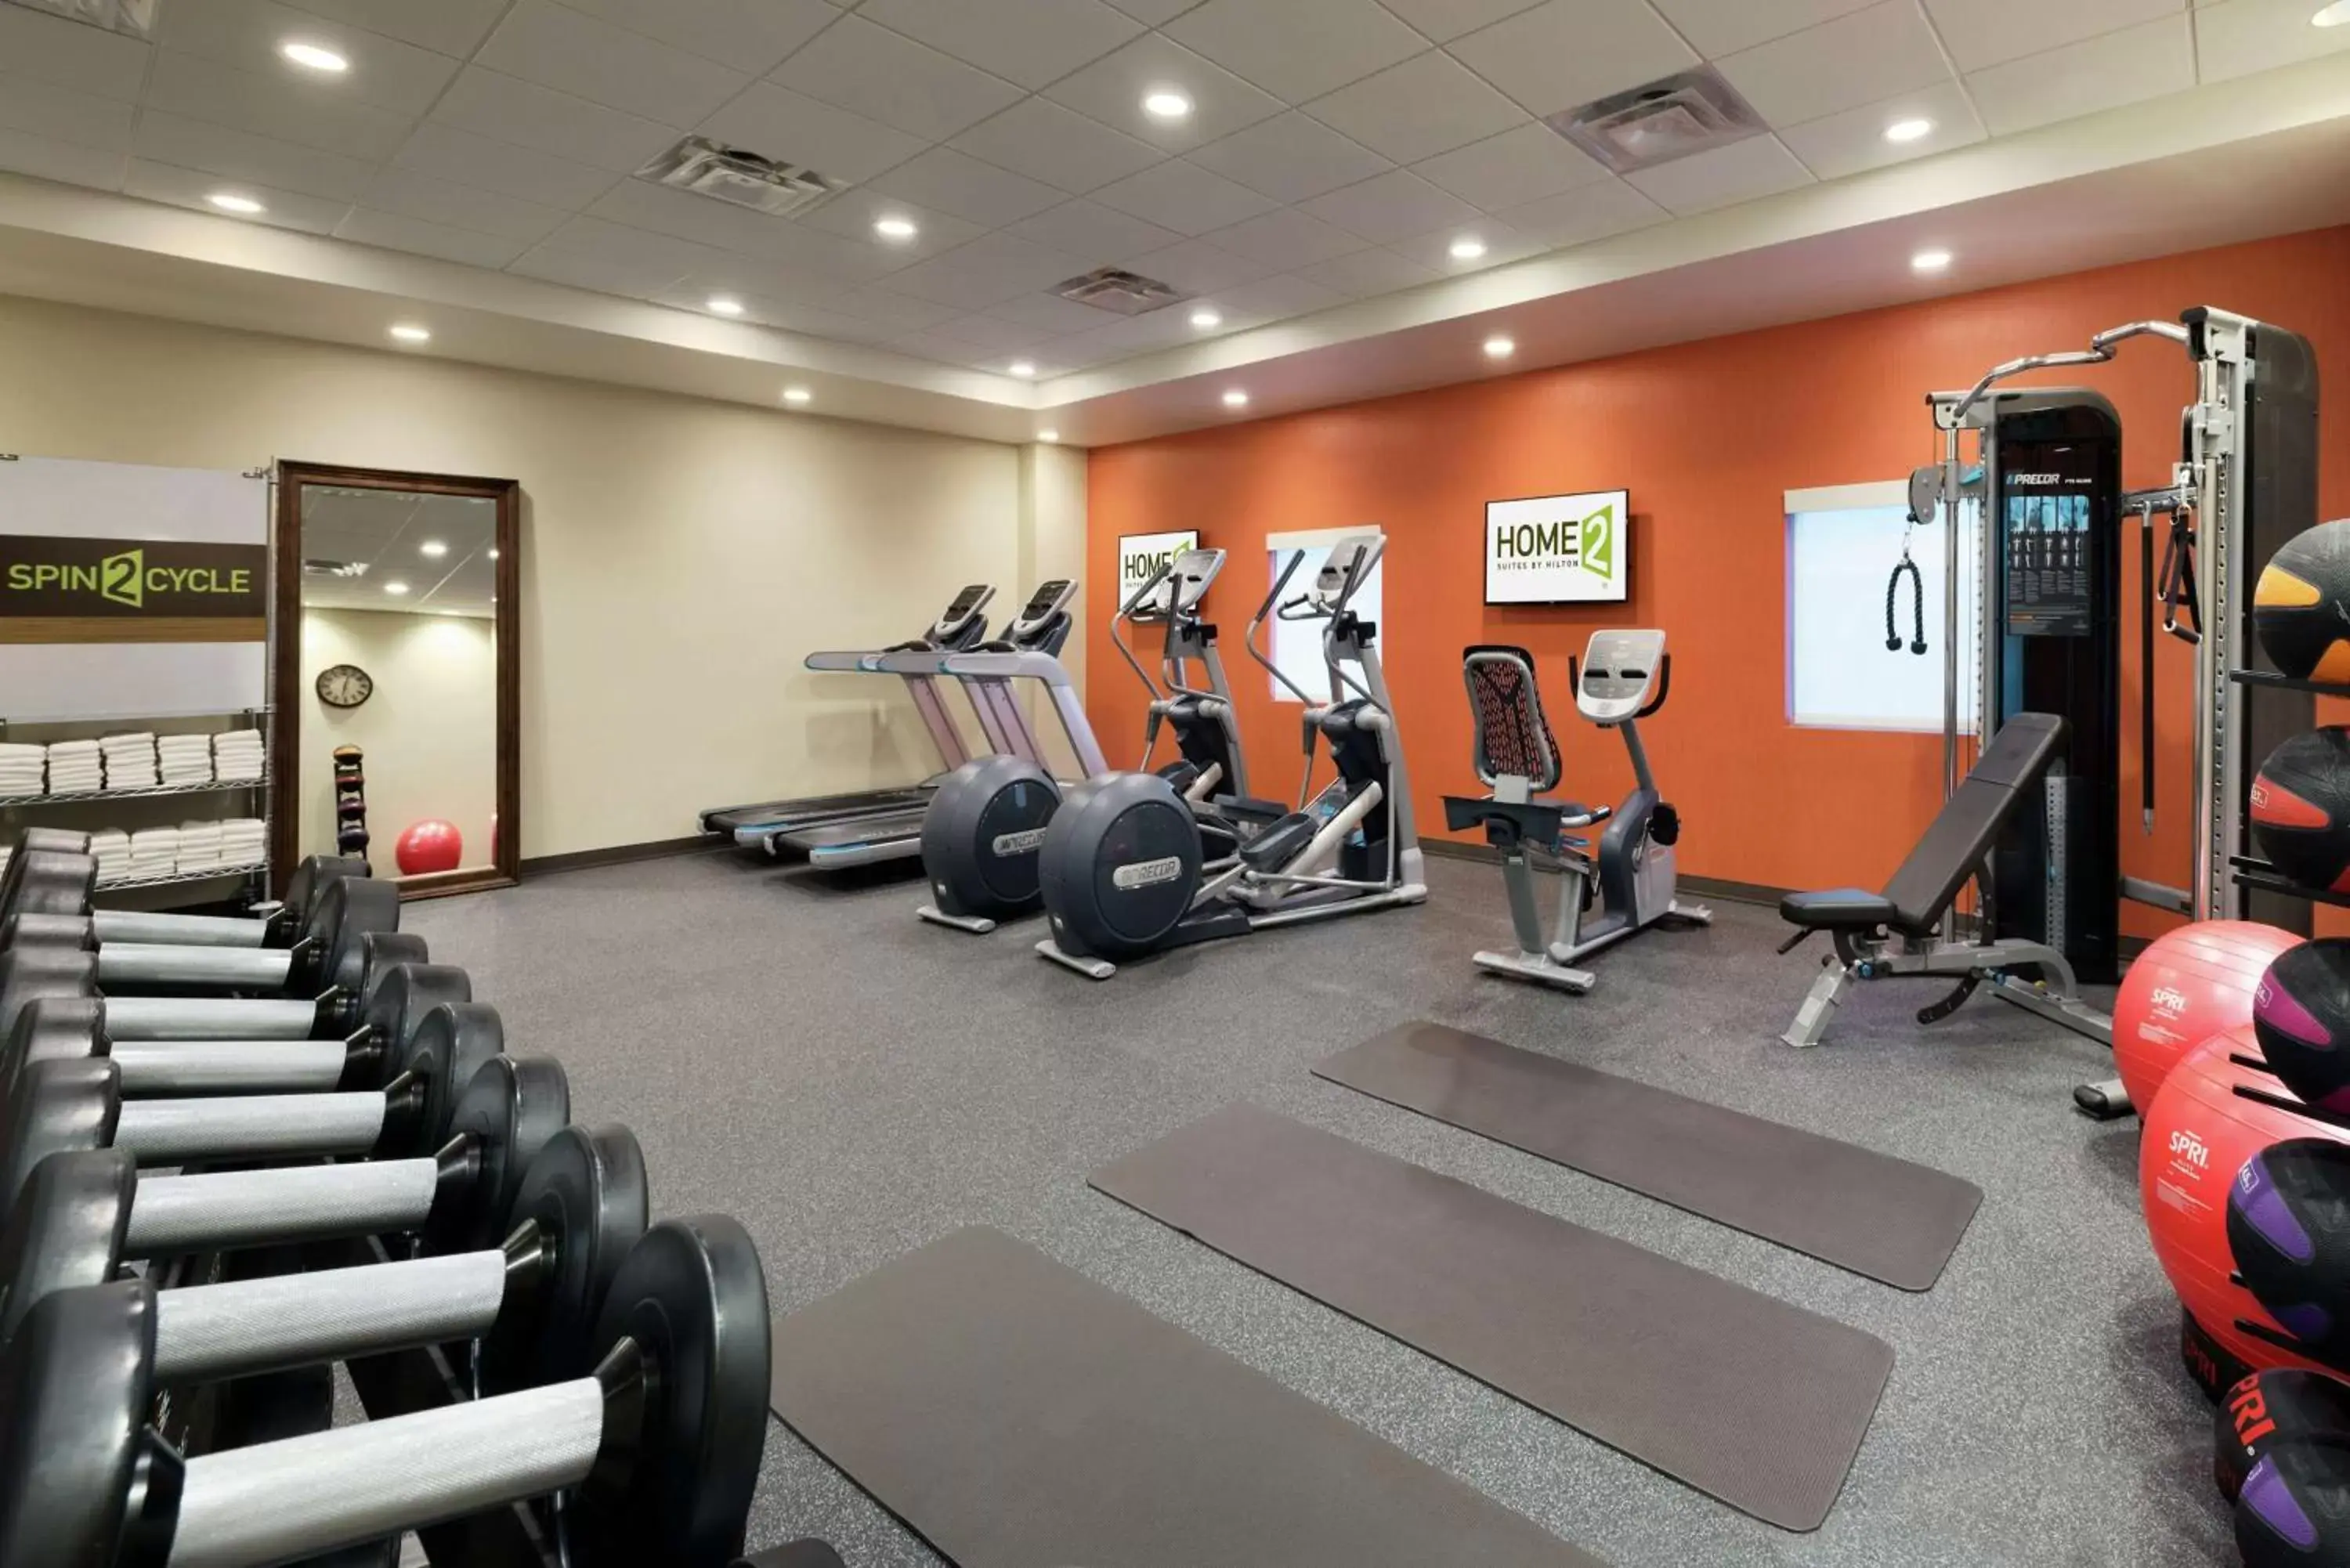 Fitness centre/facilities, Fitness Center/Facilities in Home2 Suites by Hilton Anchorage/Midtown